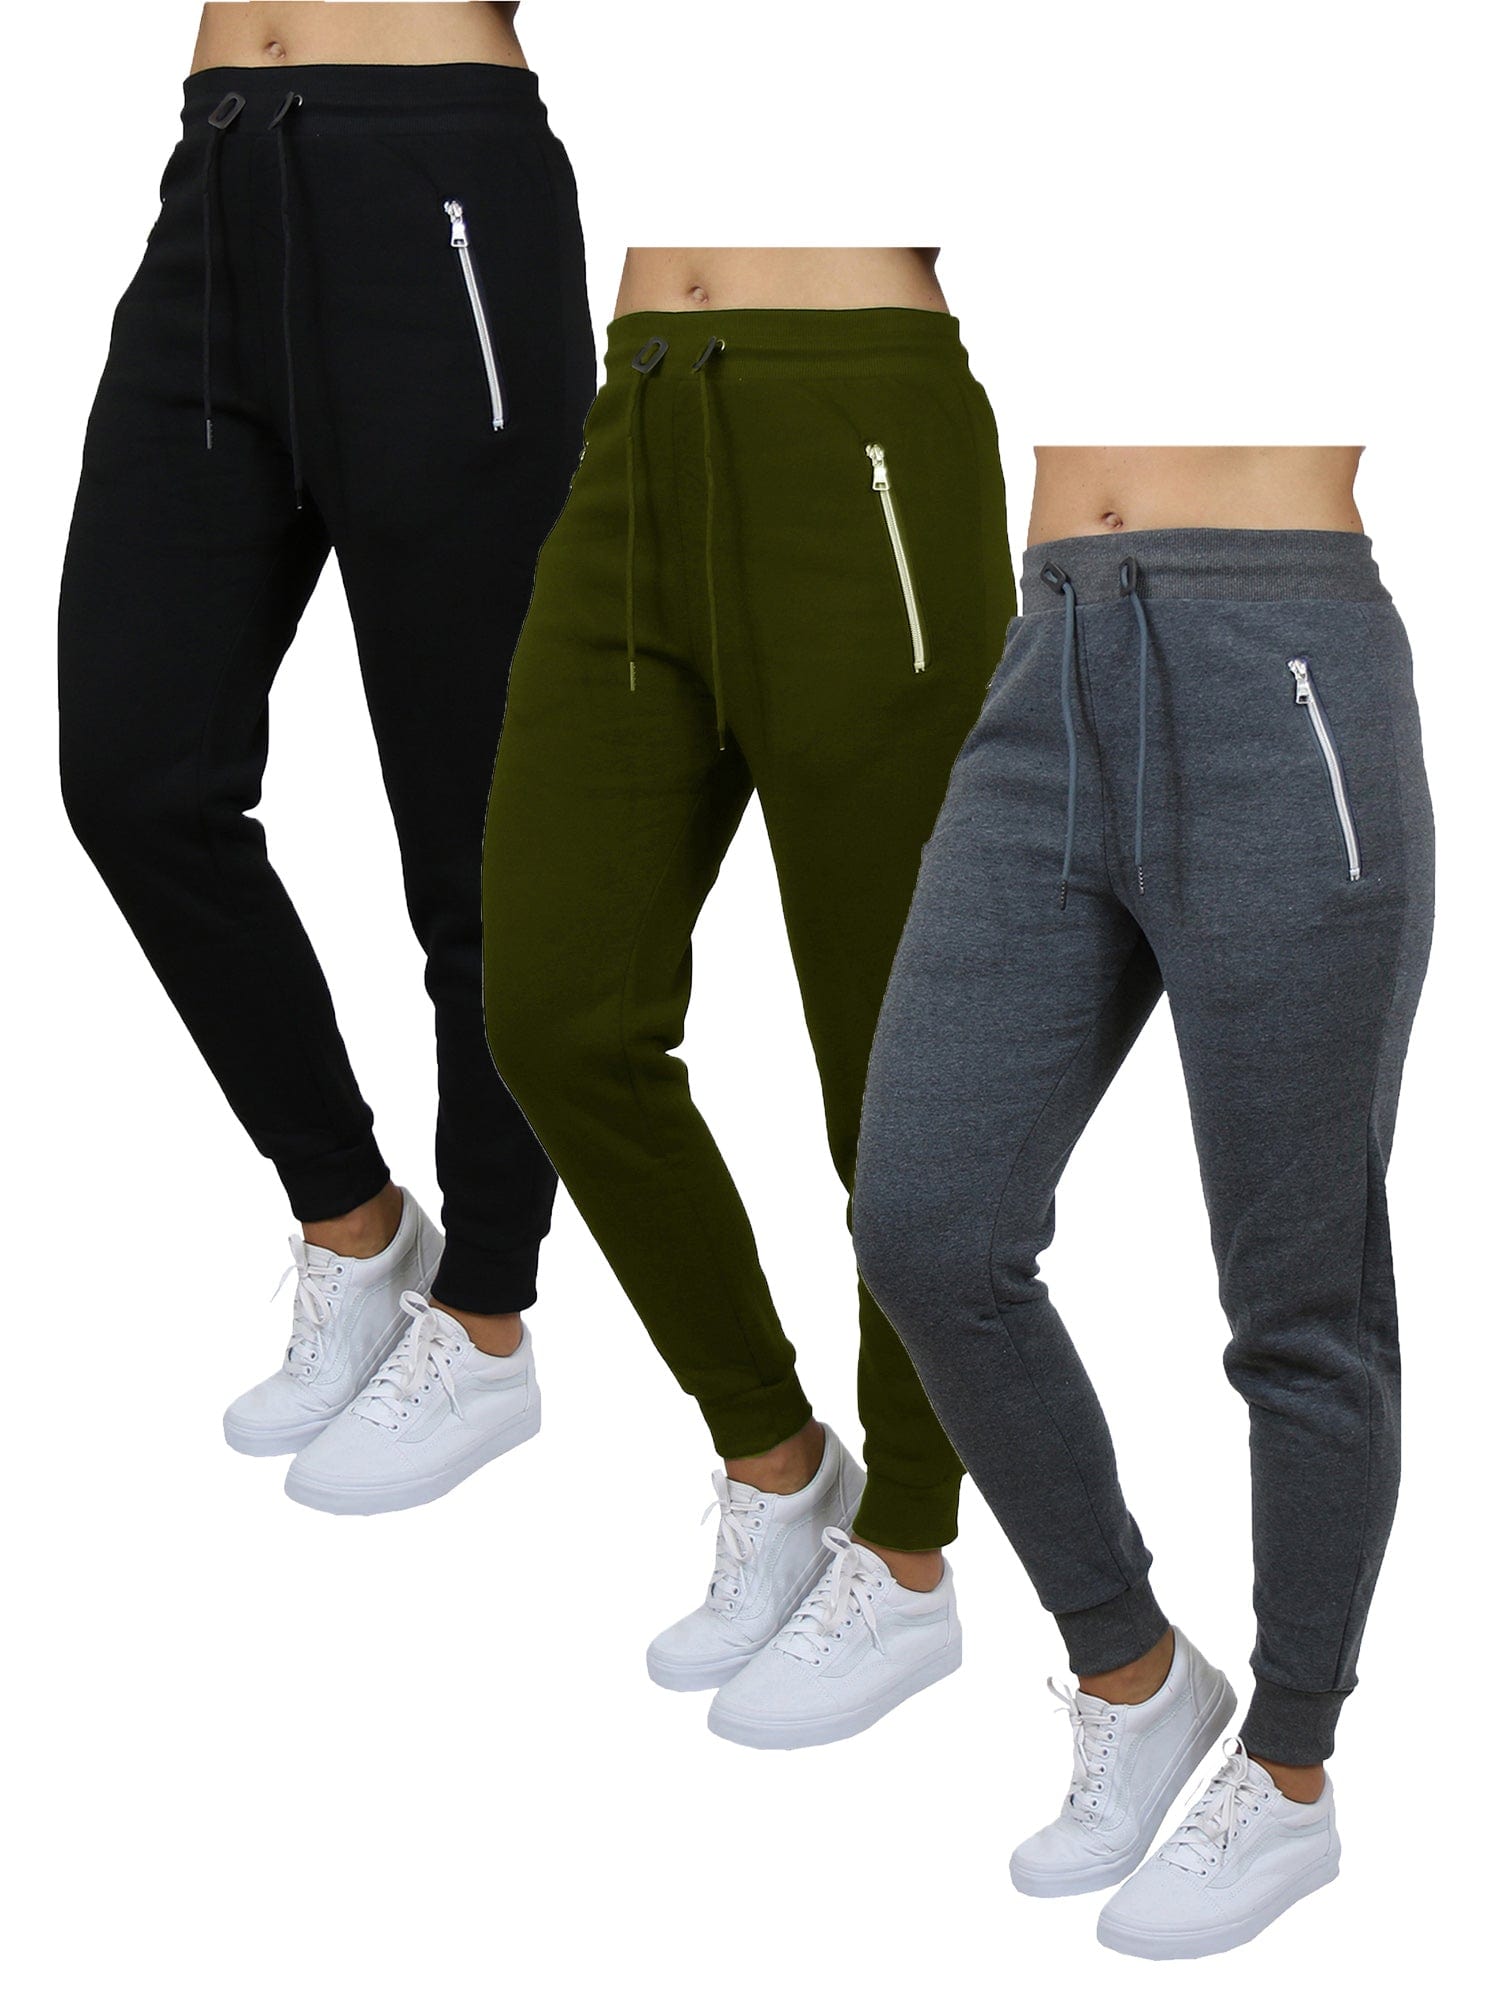 FULLSOFT 3 Pack Sweatpants for Women-Womens Joggers with Pockets